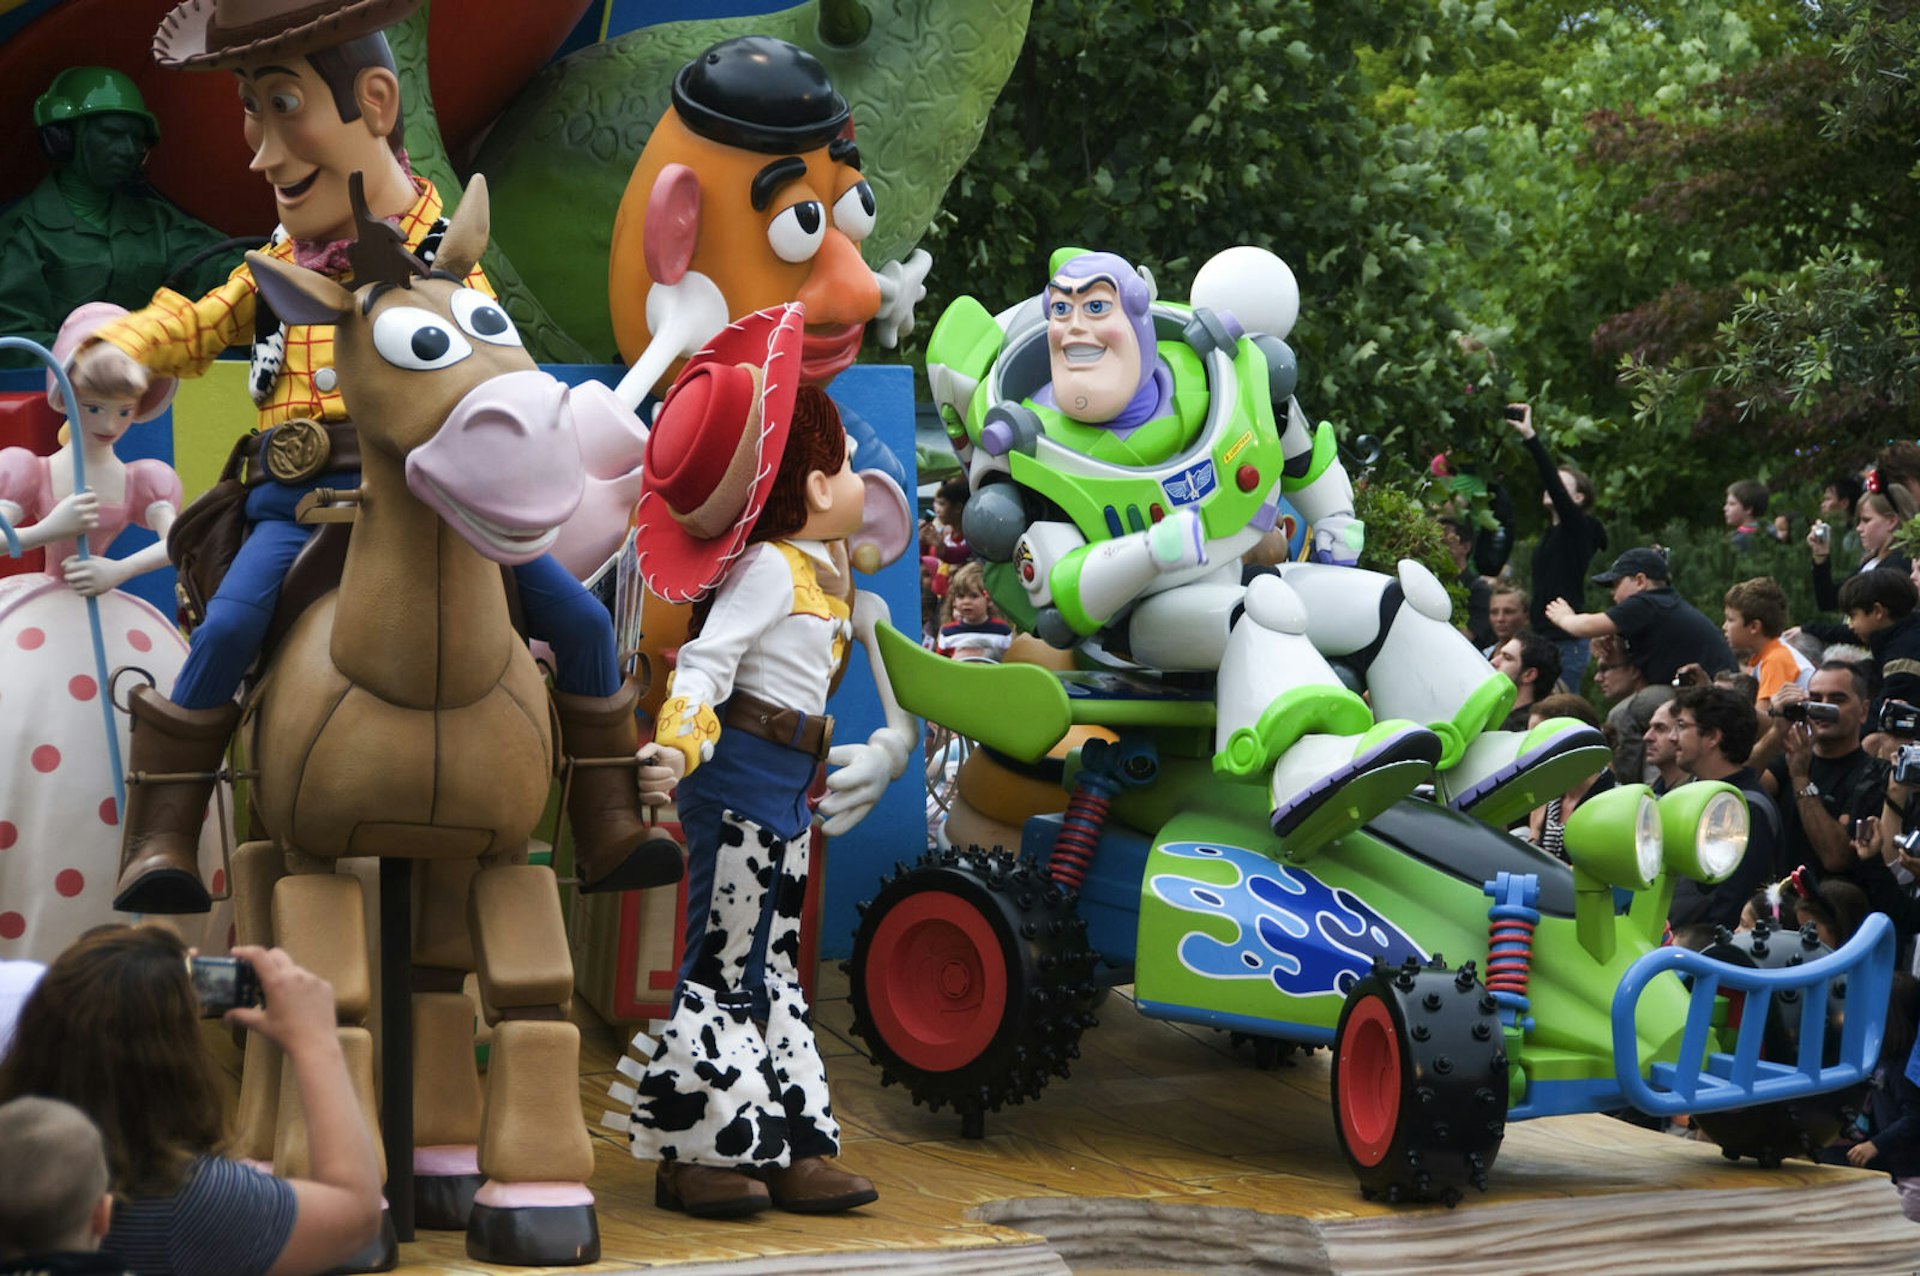 Characters from Toy Story including Buzz Lightyear, Woody, Jessie, Bullseye and Mr Potato Head